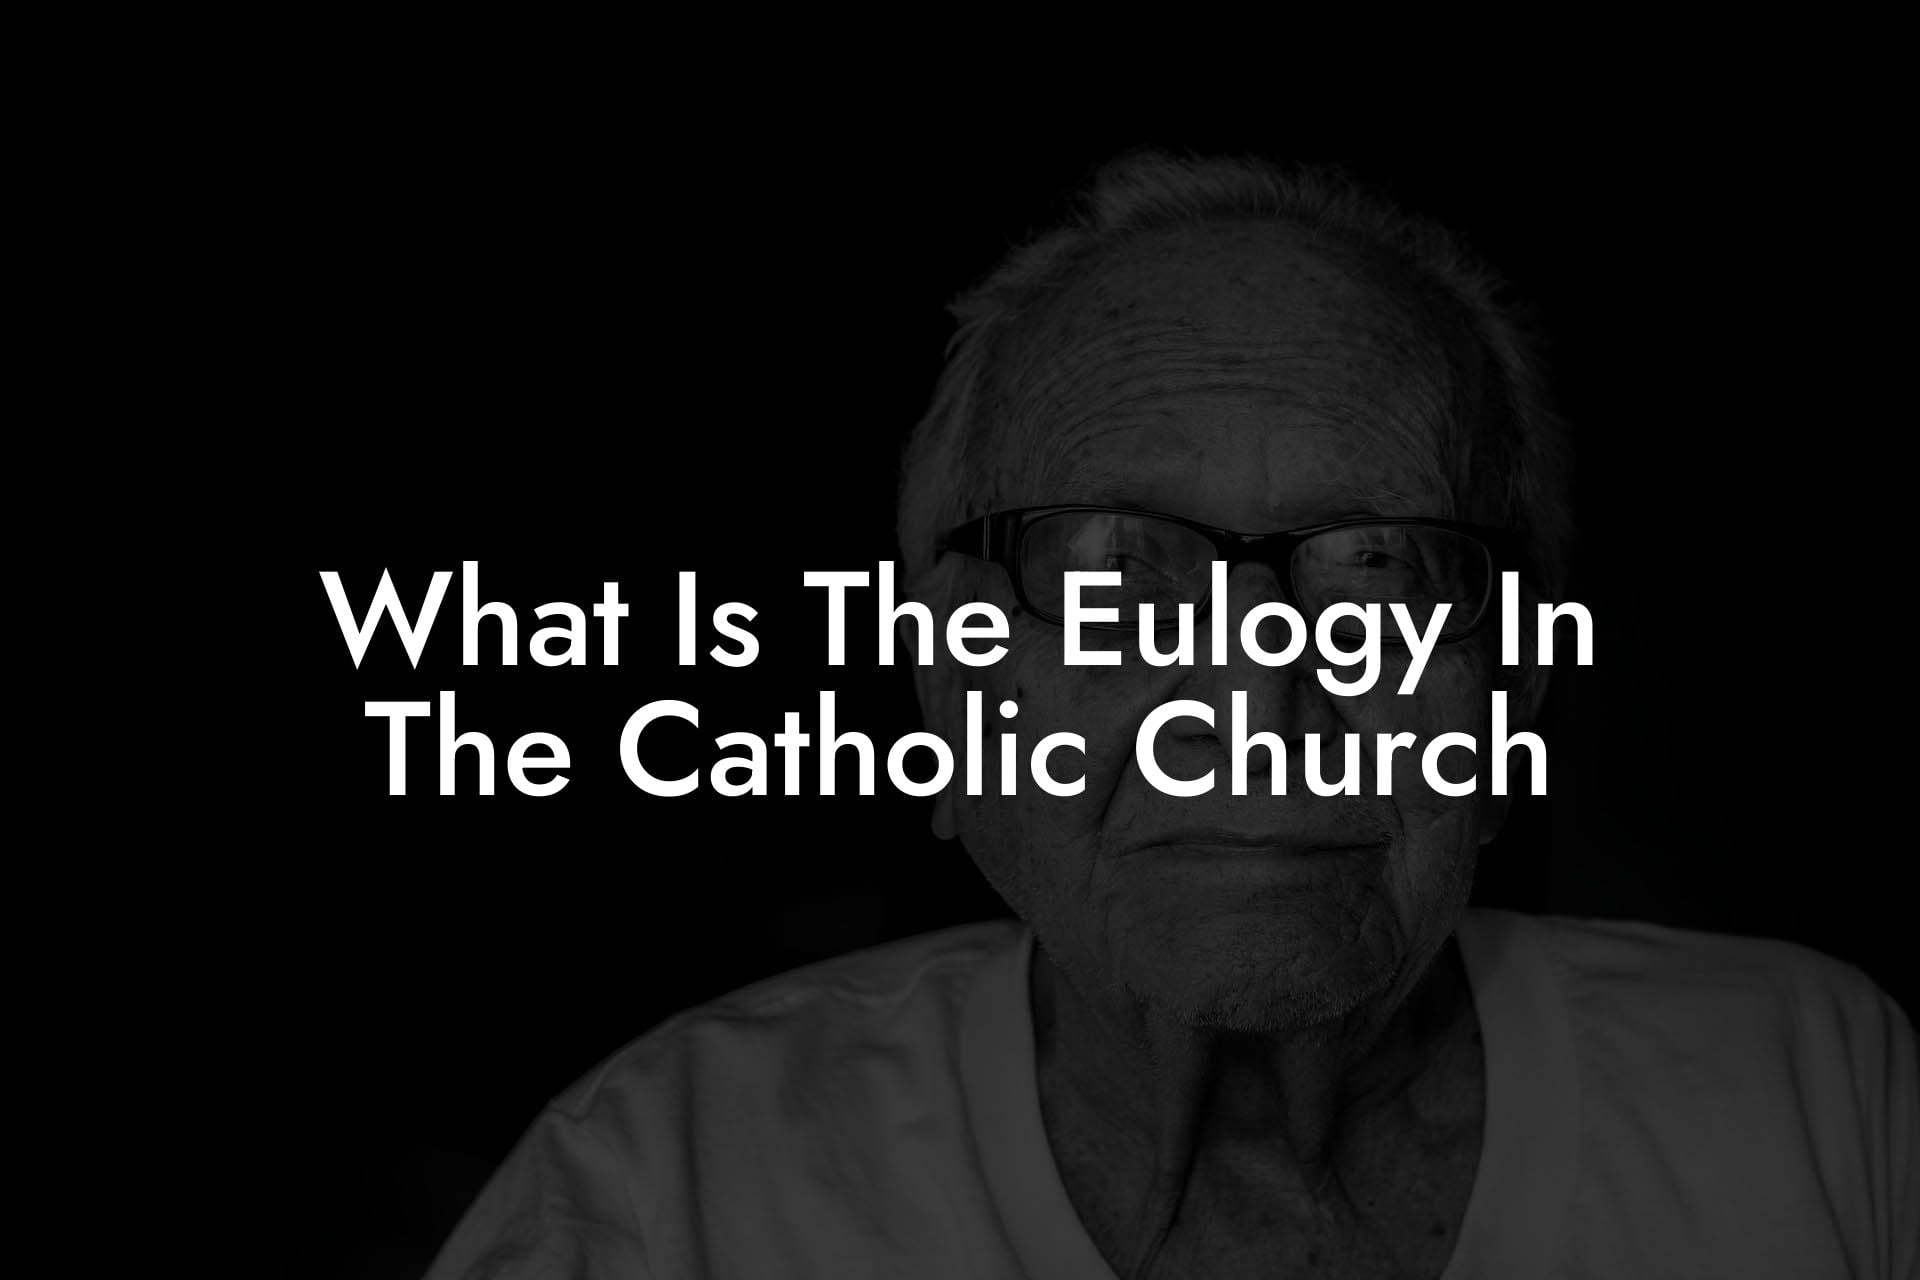 What Is The Eulogy In The Catholic Church